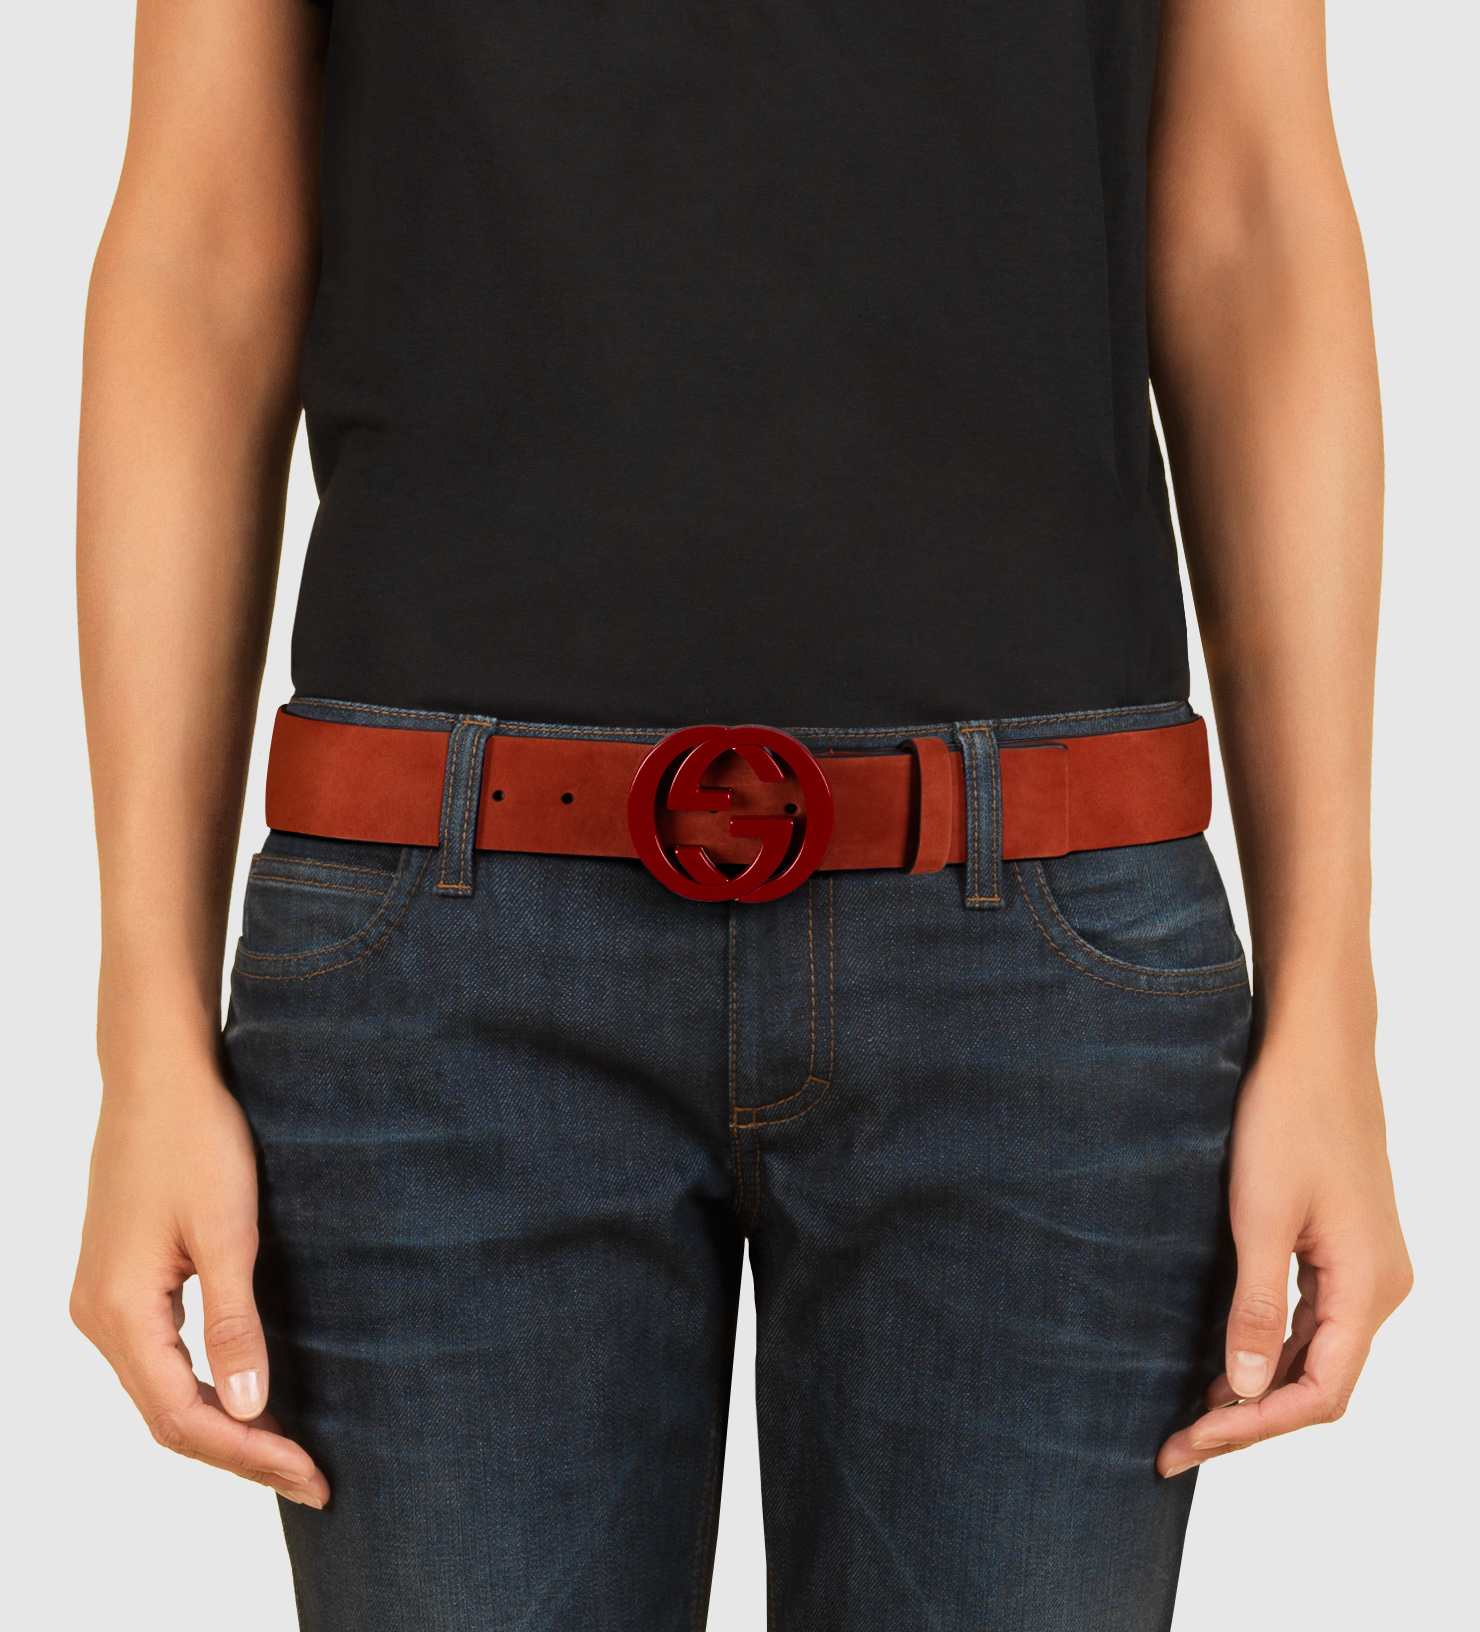 Lyst - Gucci Red Suede Belt With Interlocking G Buckle in Red for Men